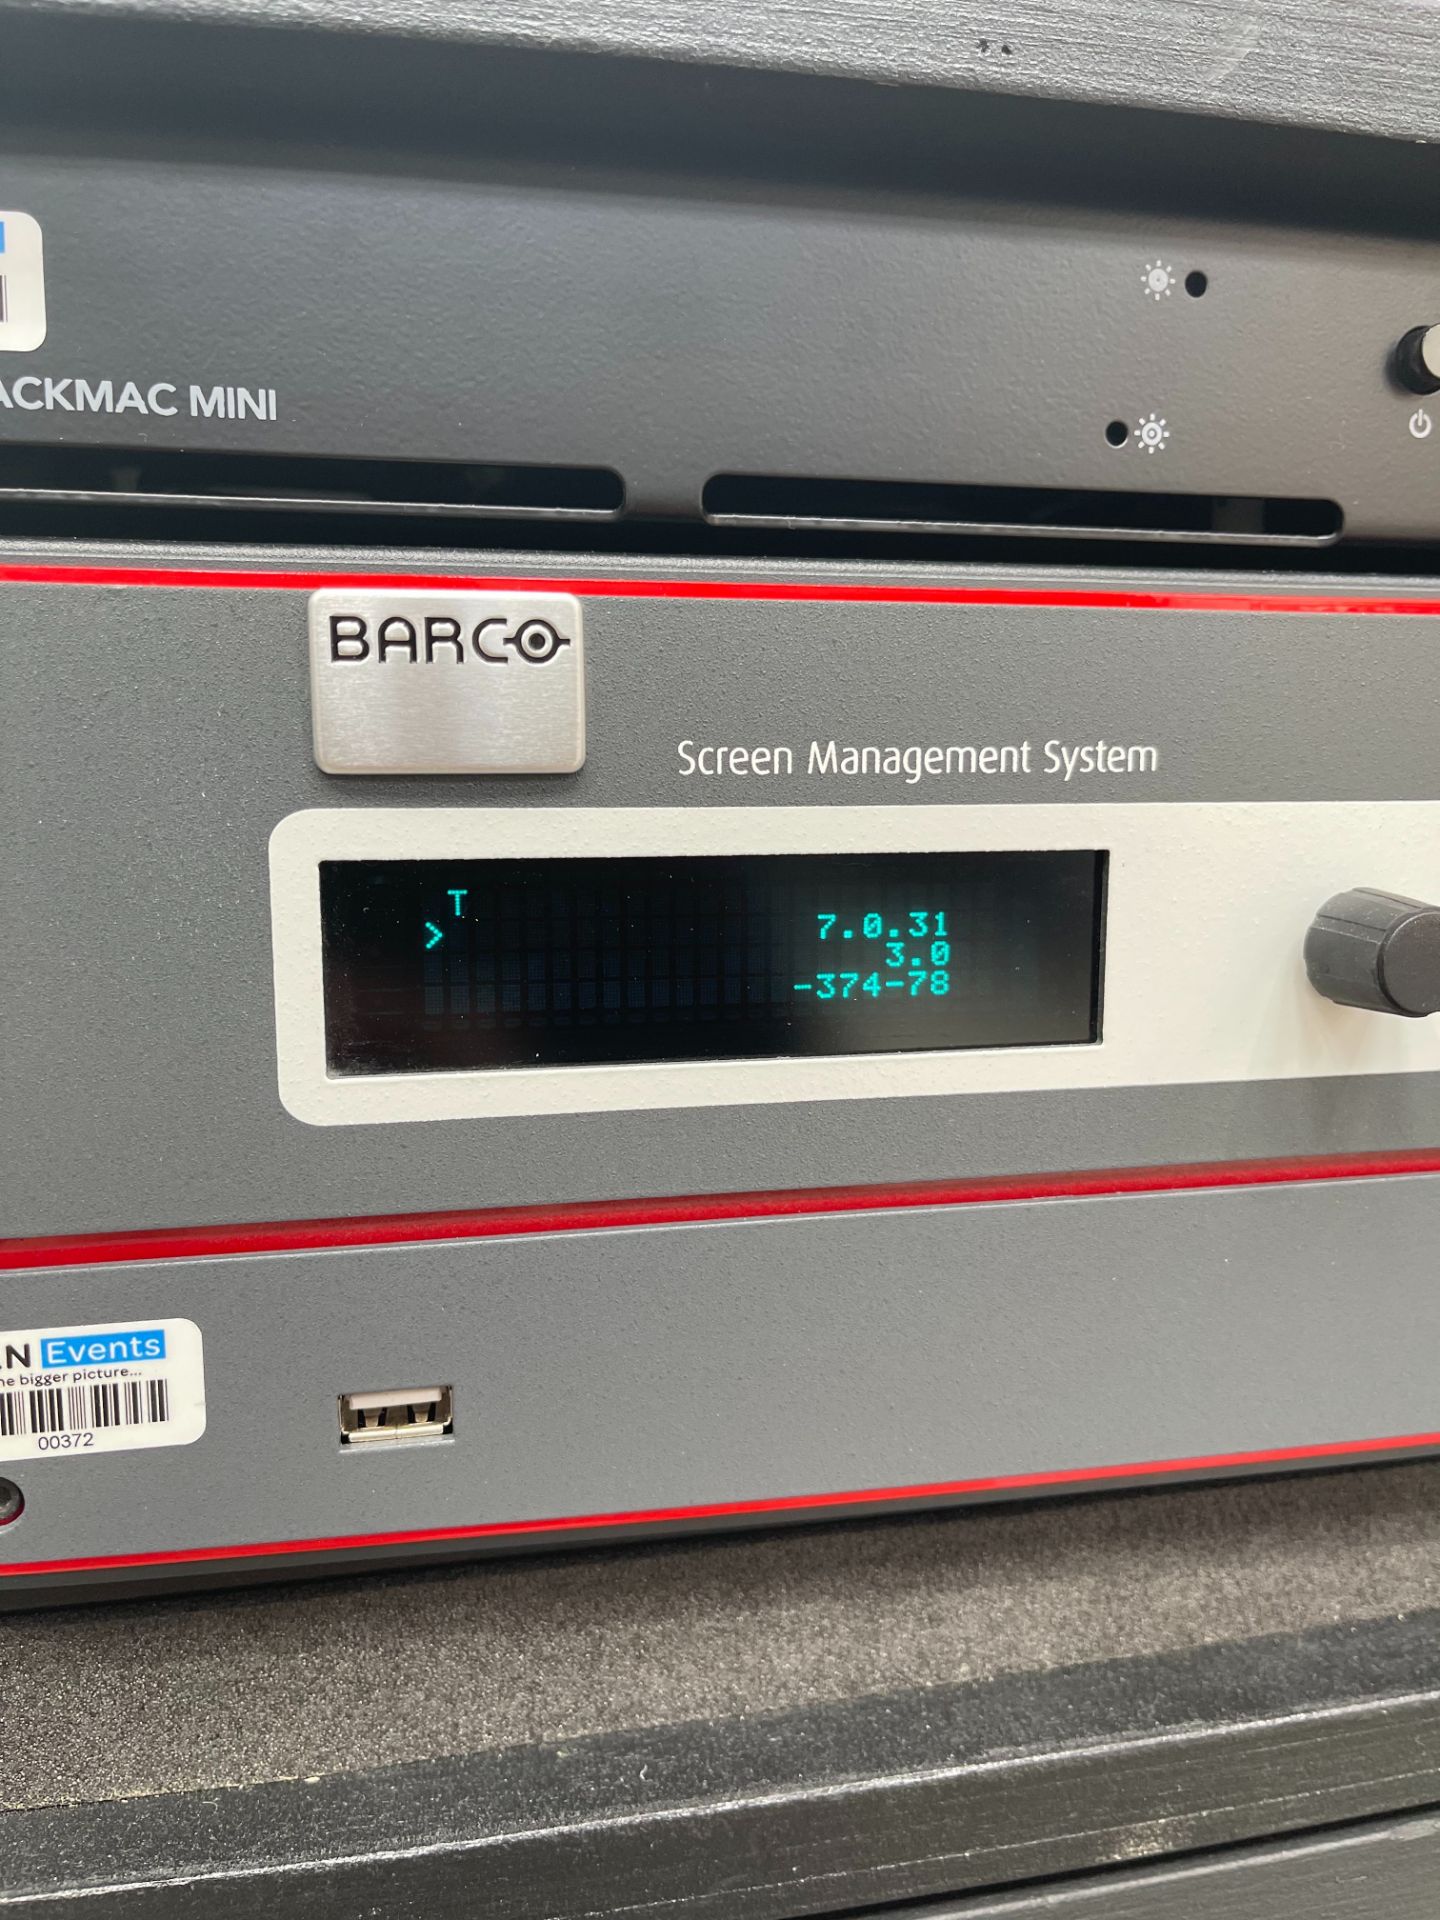 Barco S3 Screen Management System, complete with Mac Mini, Tripp-Lite UPS, Keyboard, Mouse, flight - Image 9 of 15